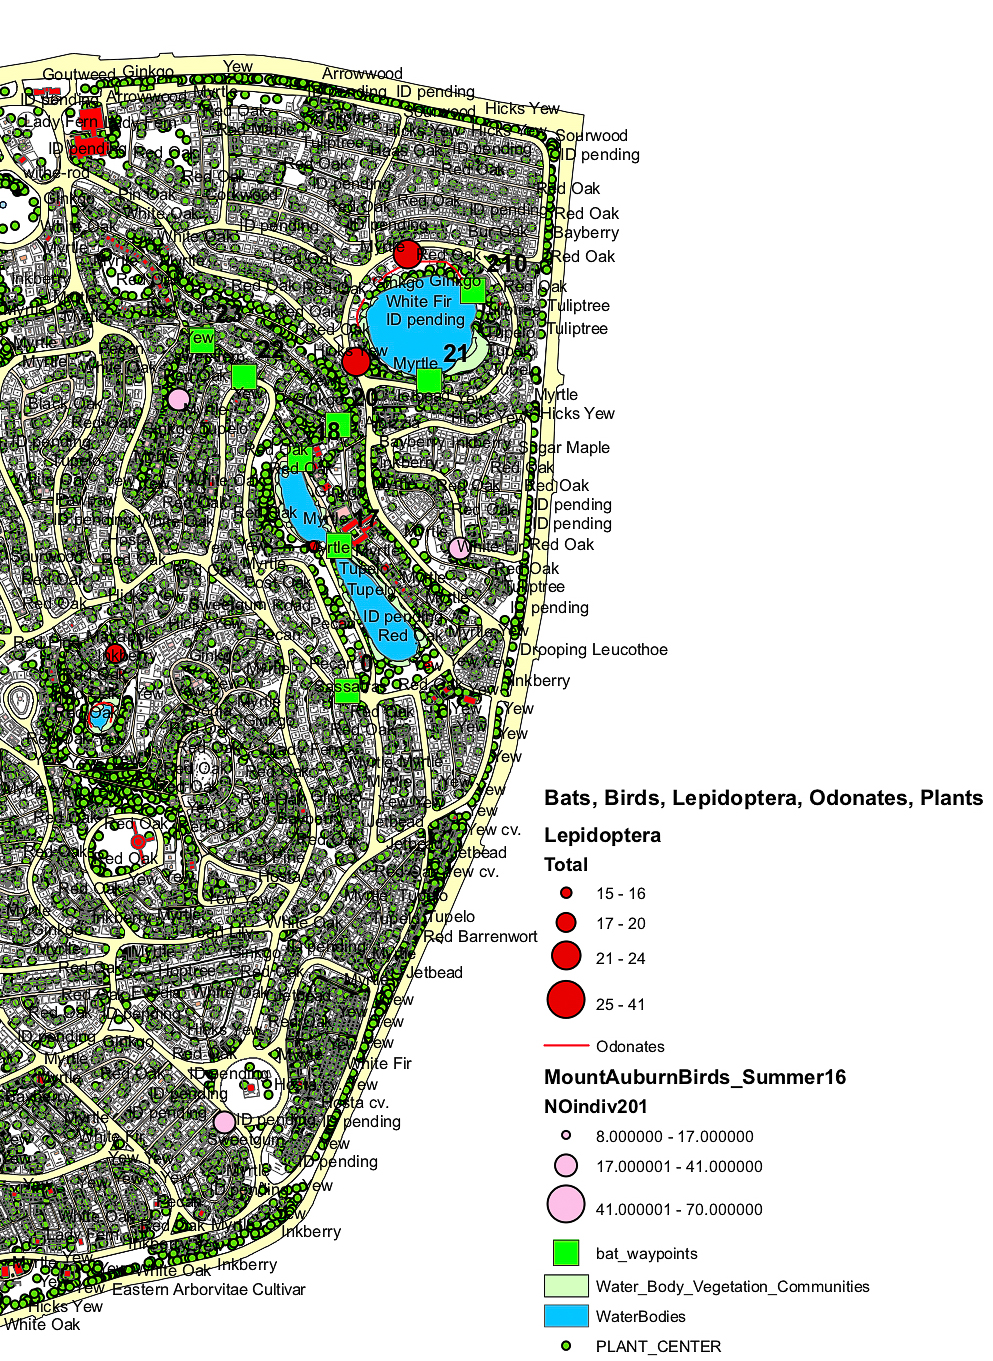 A sample GIS map showing the overlays of bats, birds, plants, etc recorded.